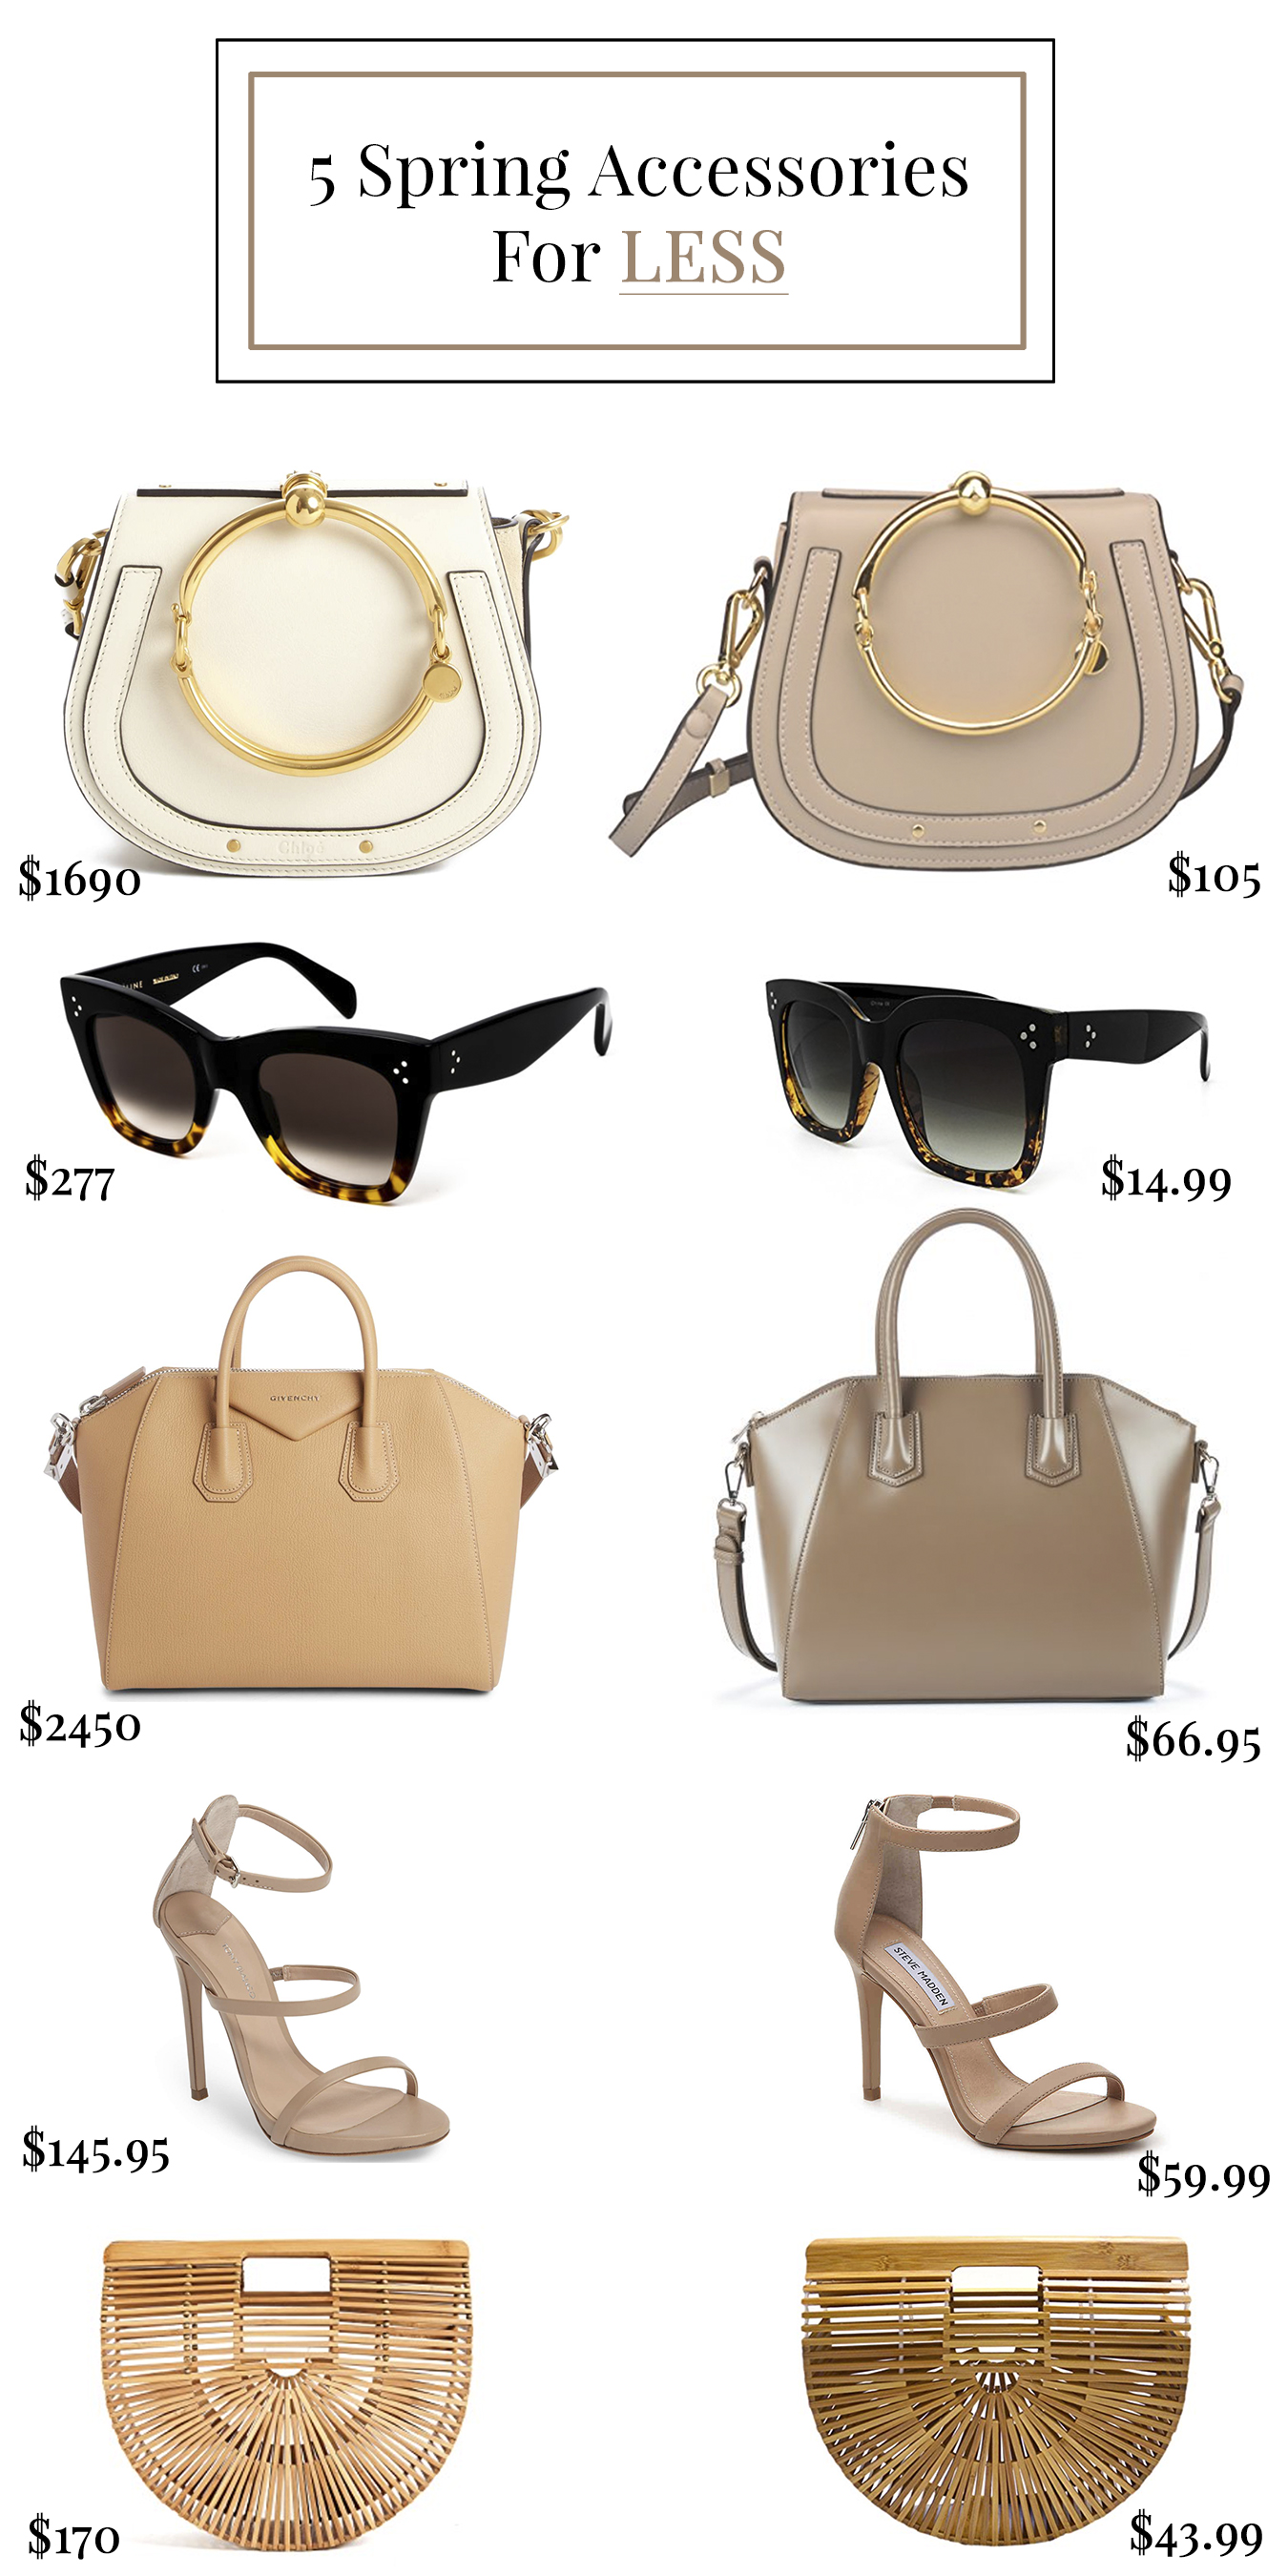 5 Spring Accessories for Less - J. Cathell